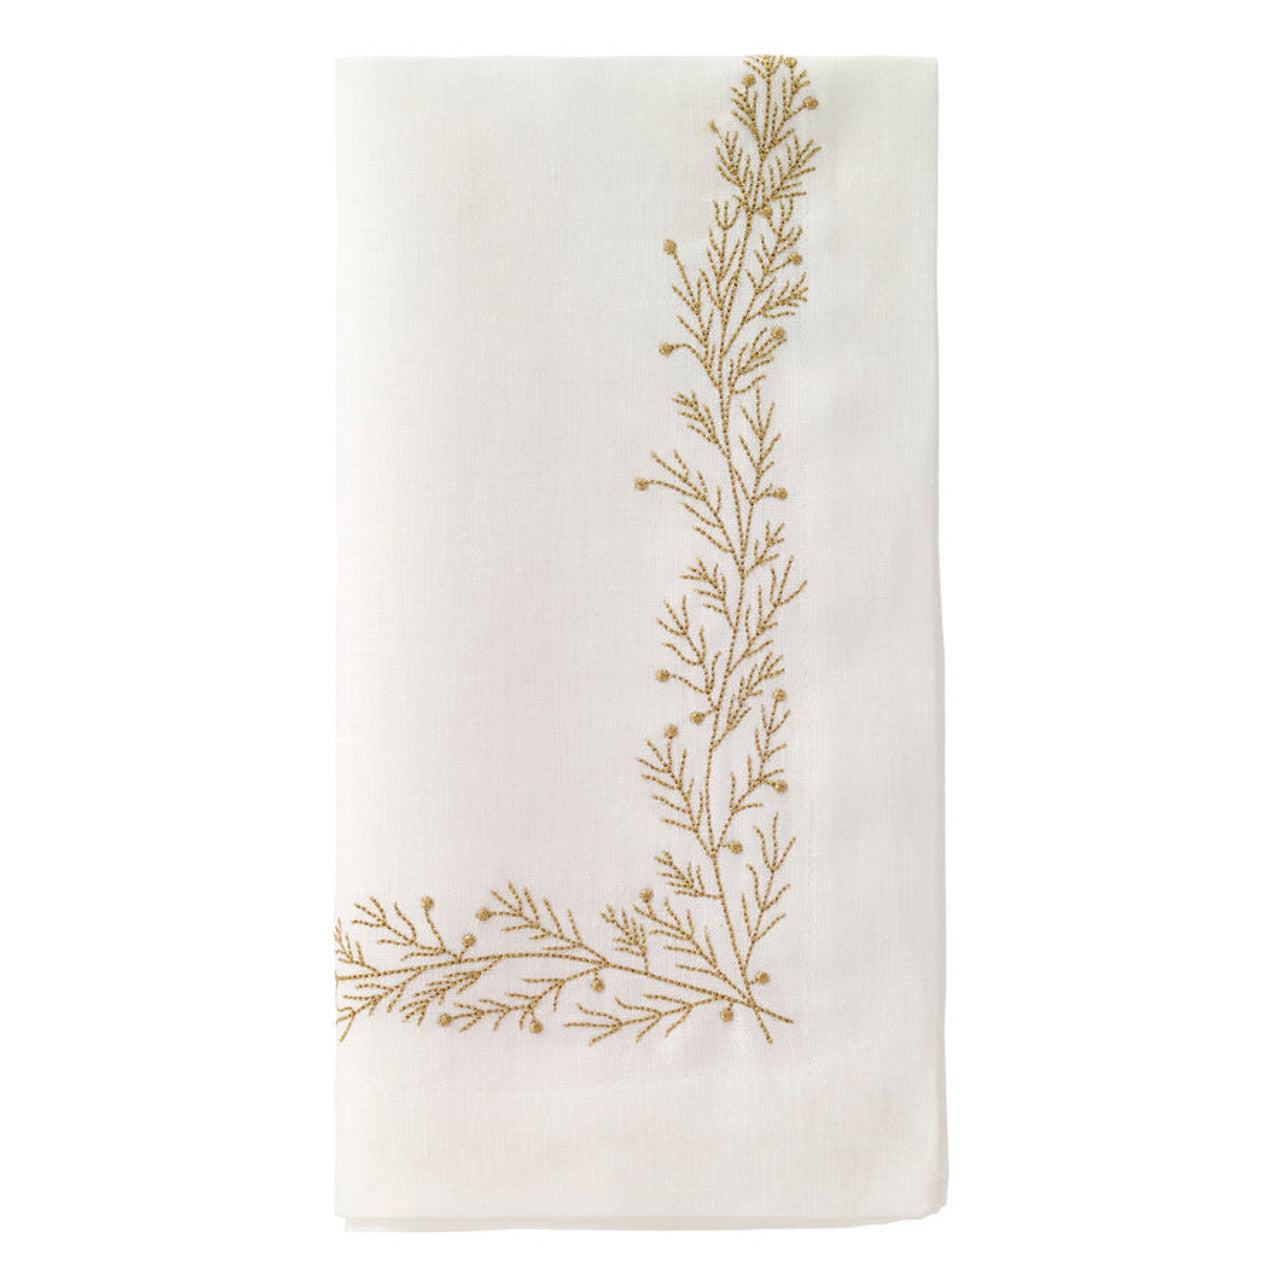 Bodrum Holly Gold Napkins s/4